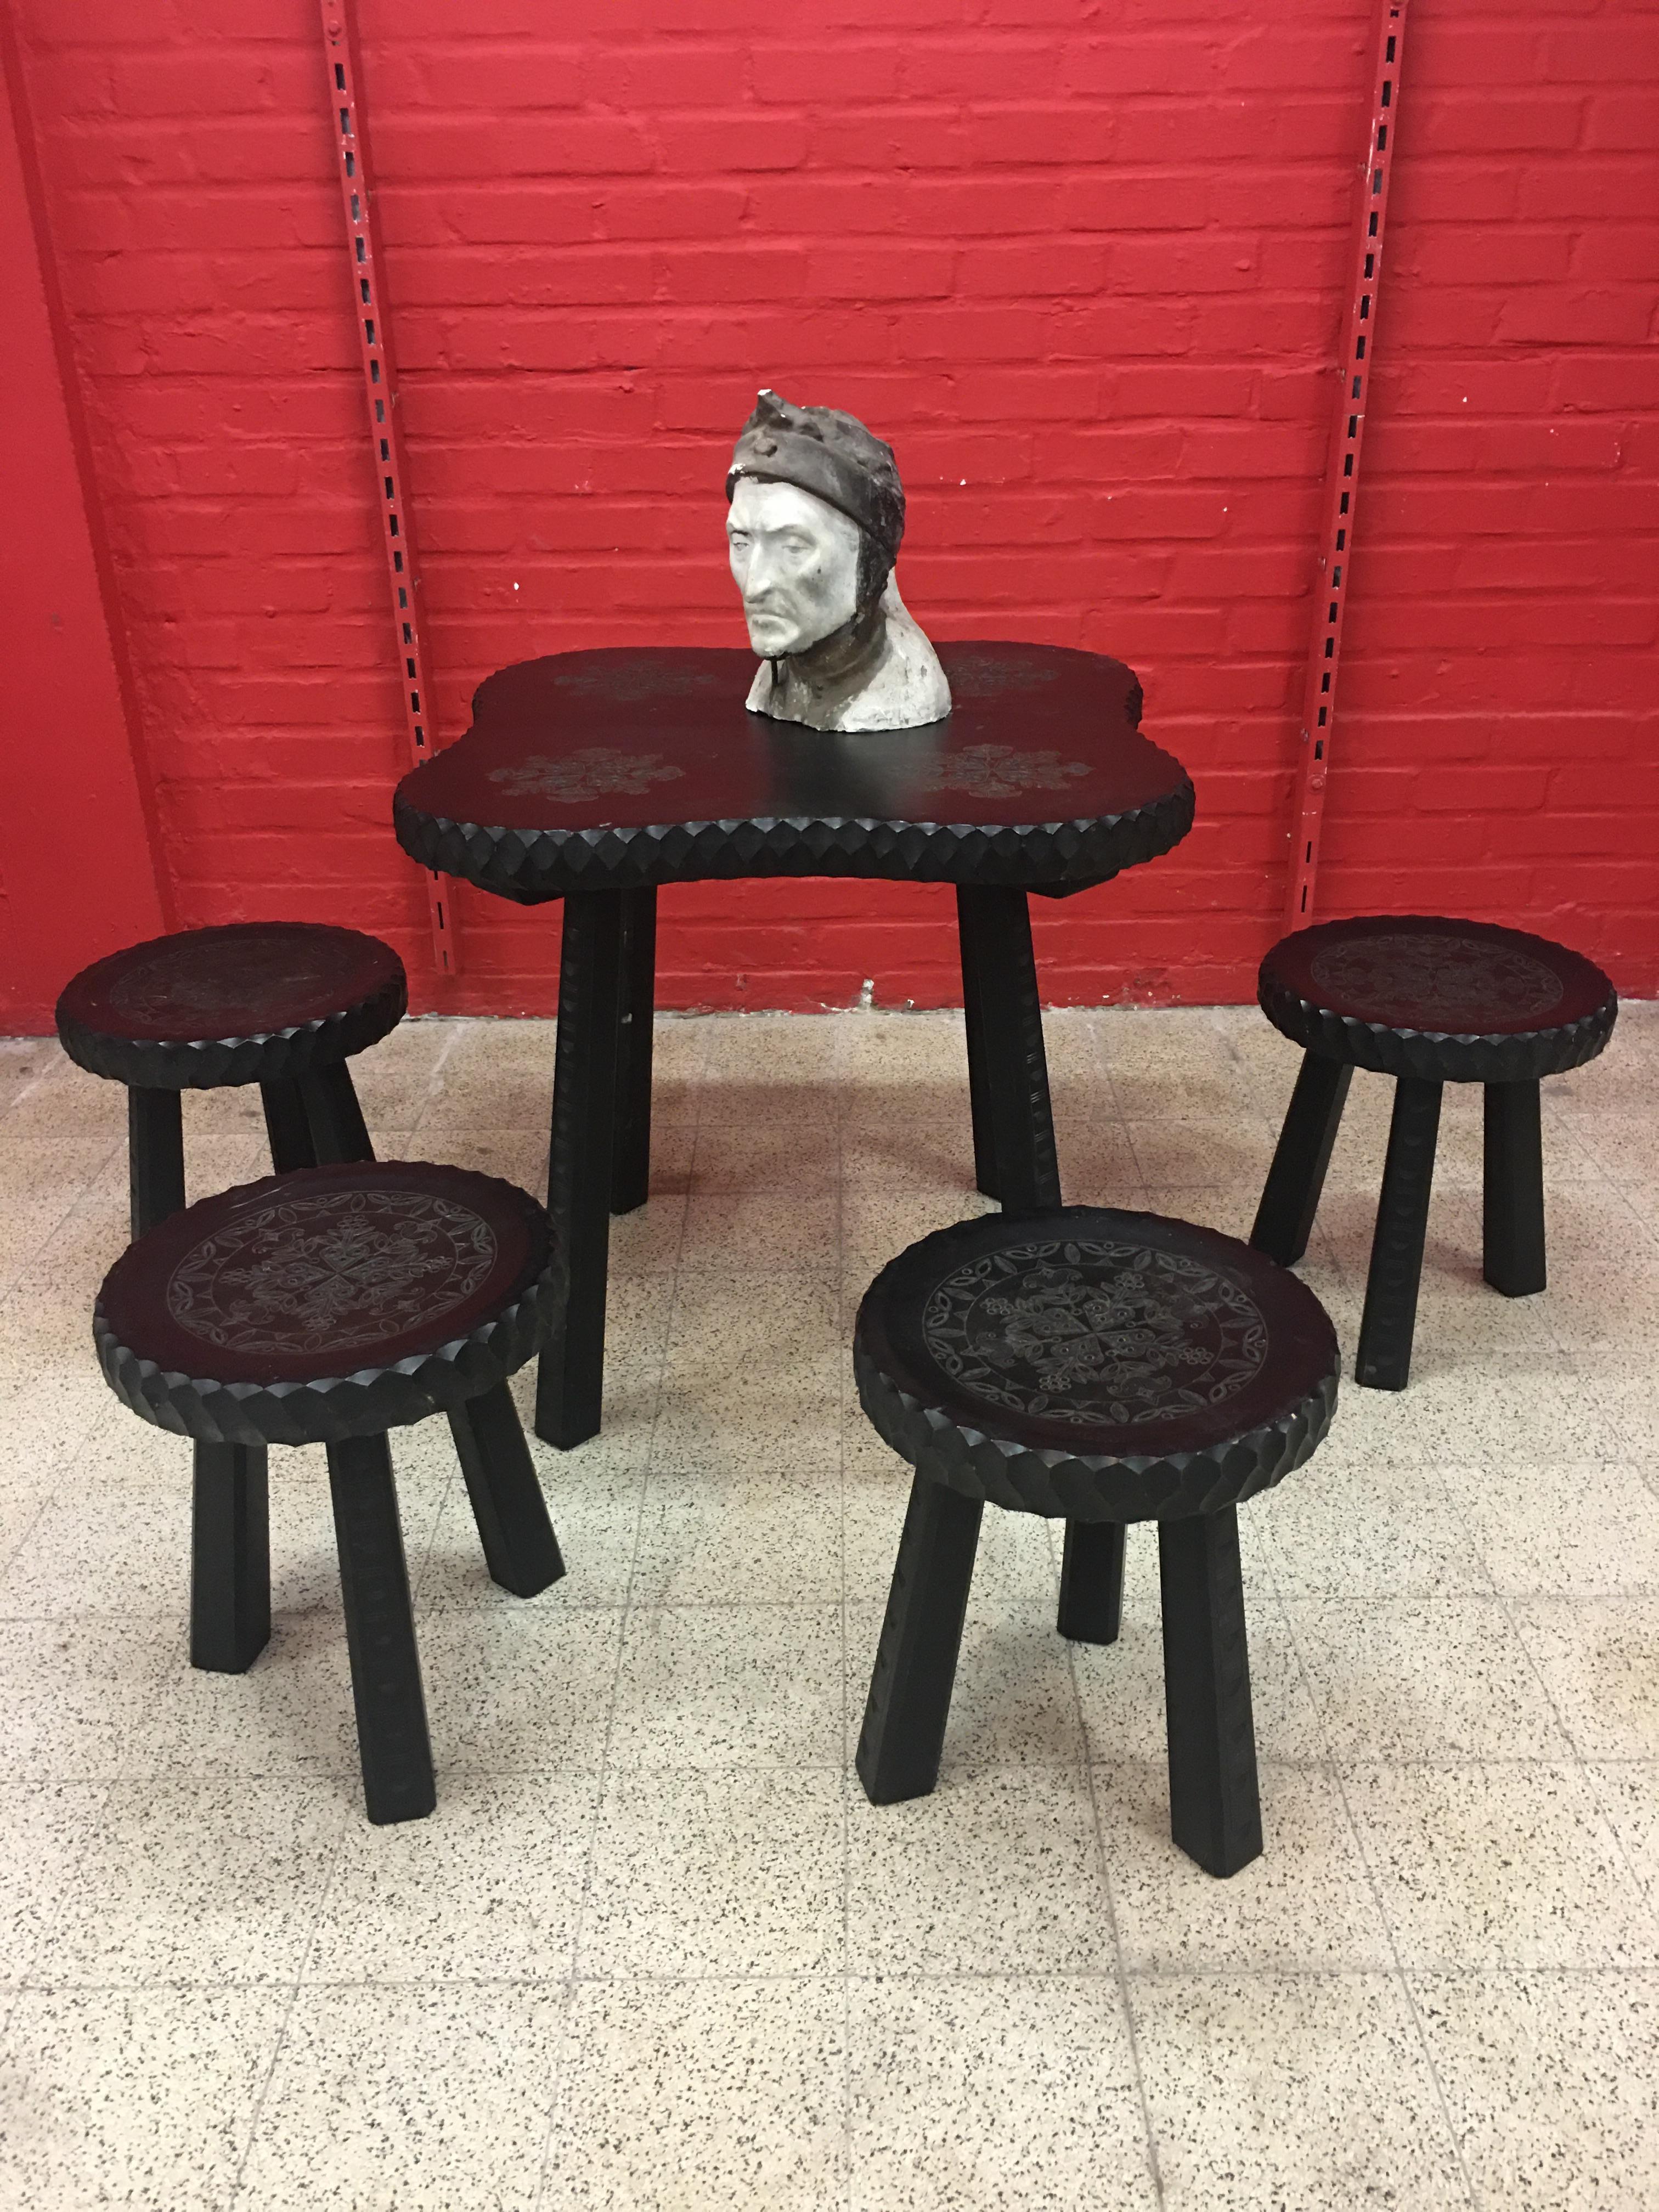 Four Organic Stools in Blackened Wood, circa 1950-1960 For Sale 6